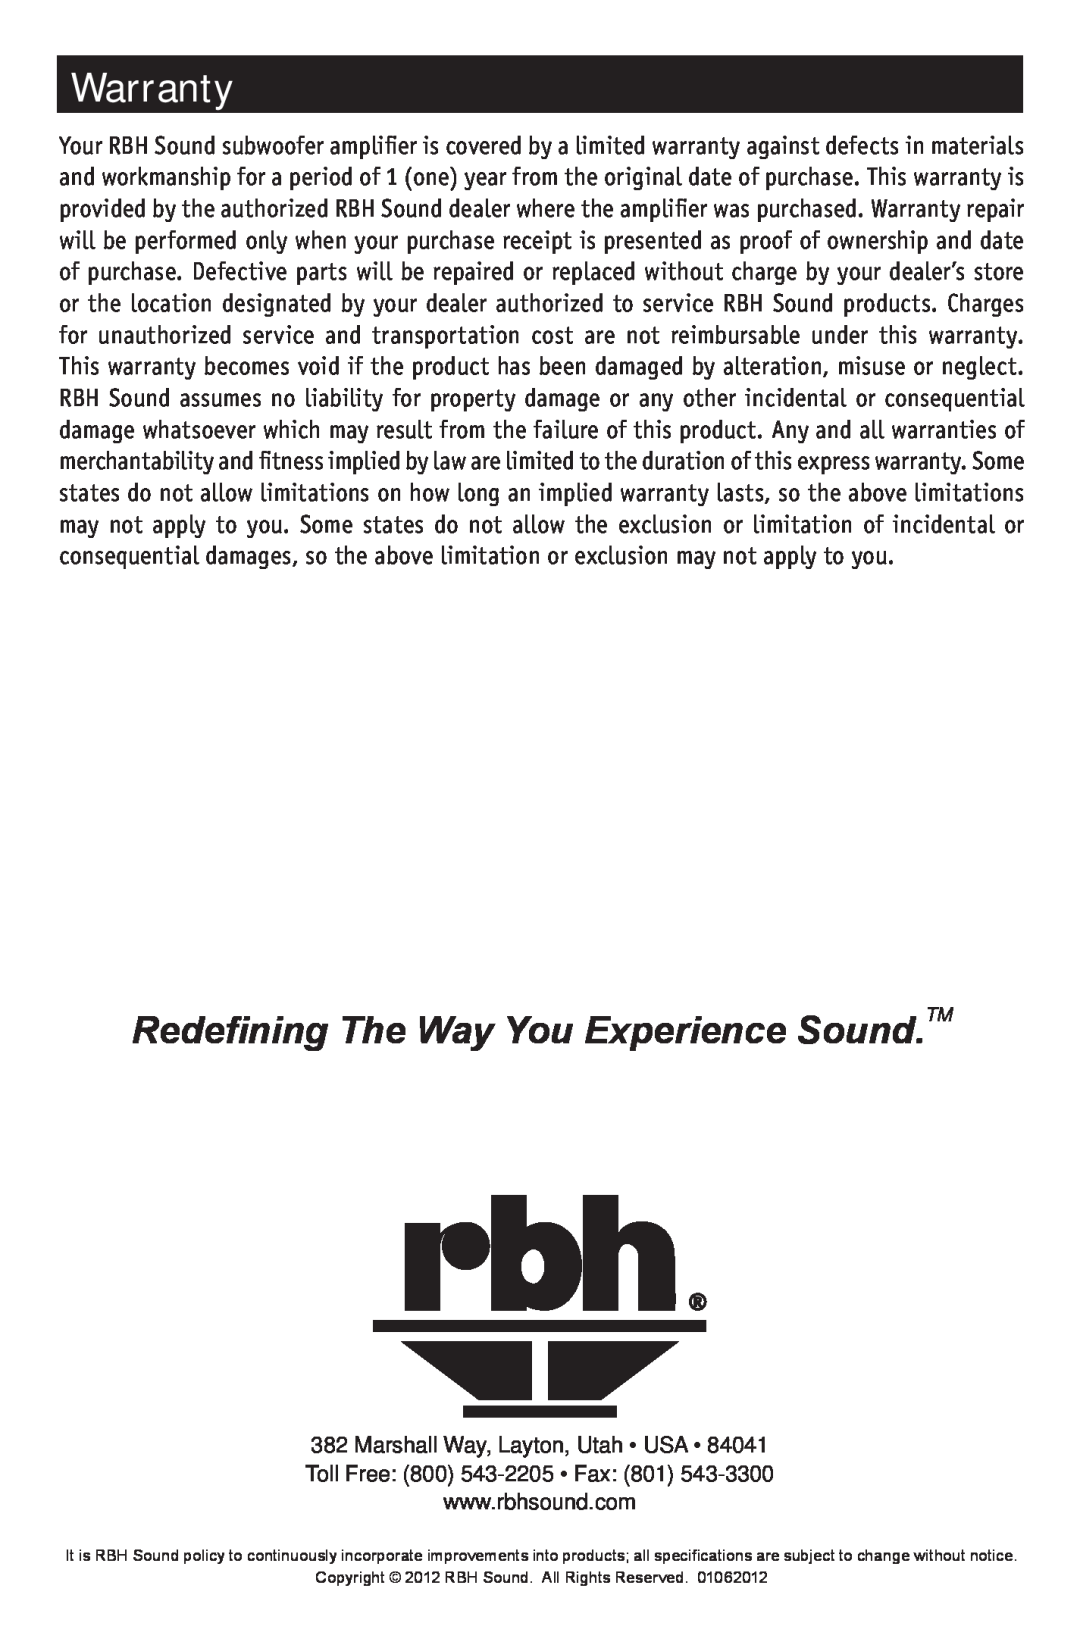 RBH Sound CA-200 owner manual Warranty, Redefining The Way You Experience Sound.TM 